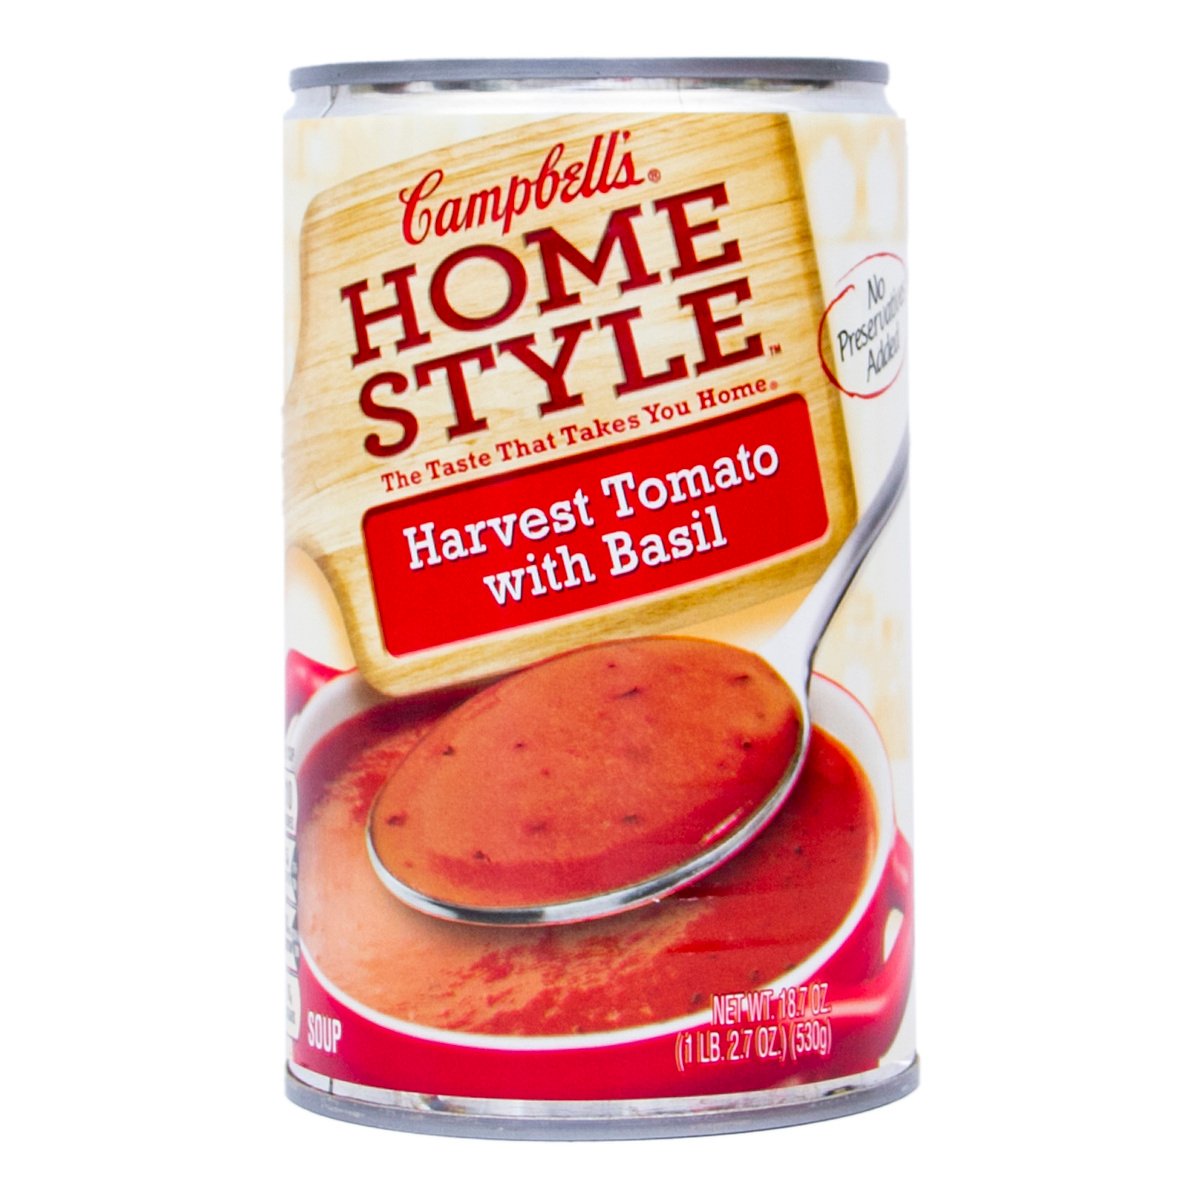 Campbell's Home Style Harvest Tomato with Basil 530 g